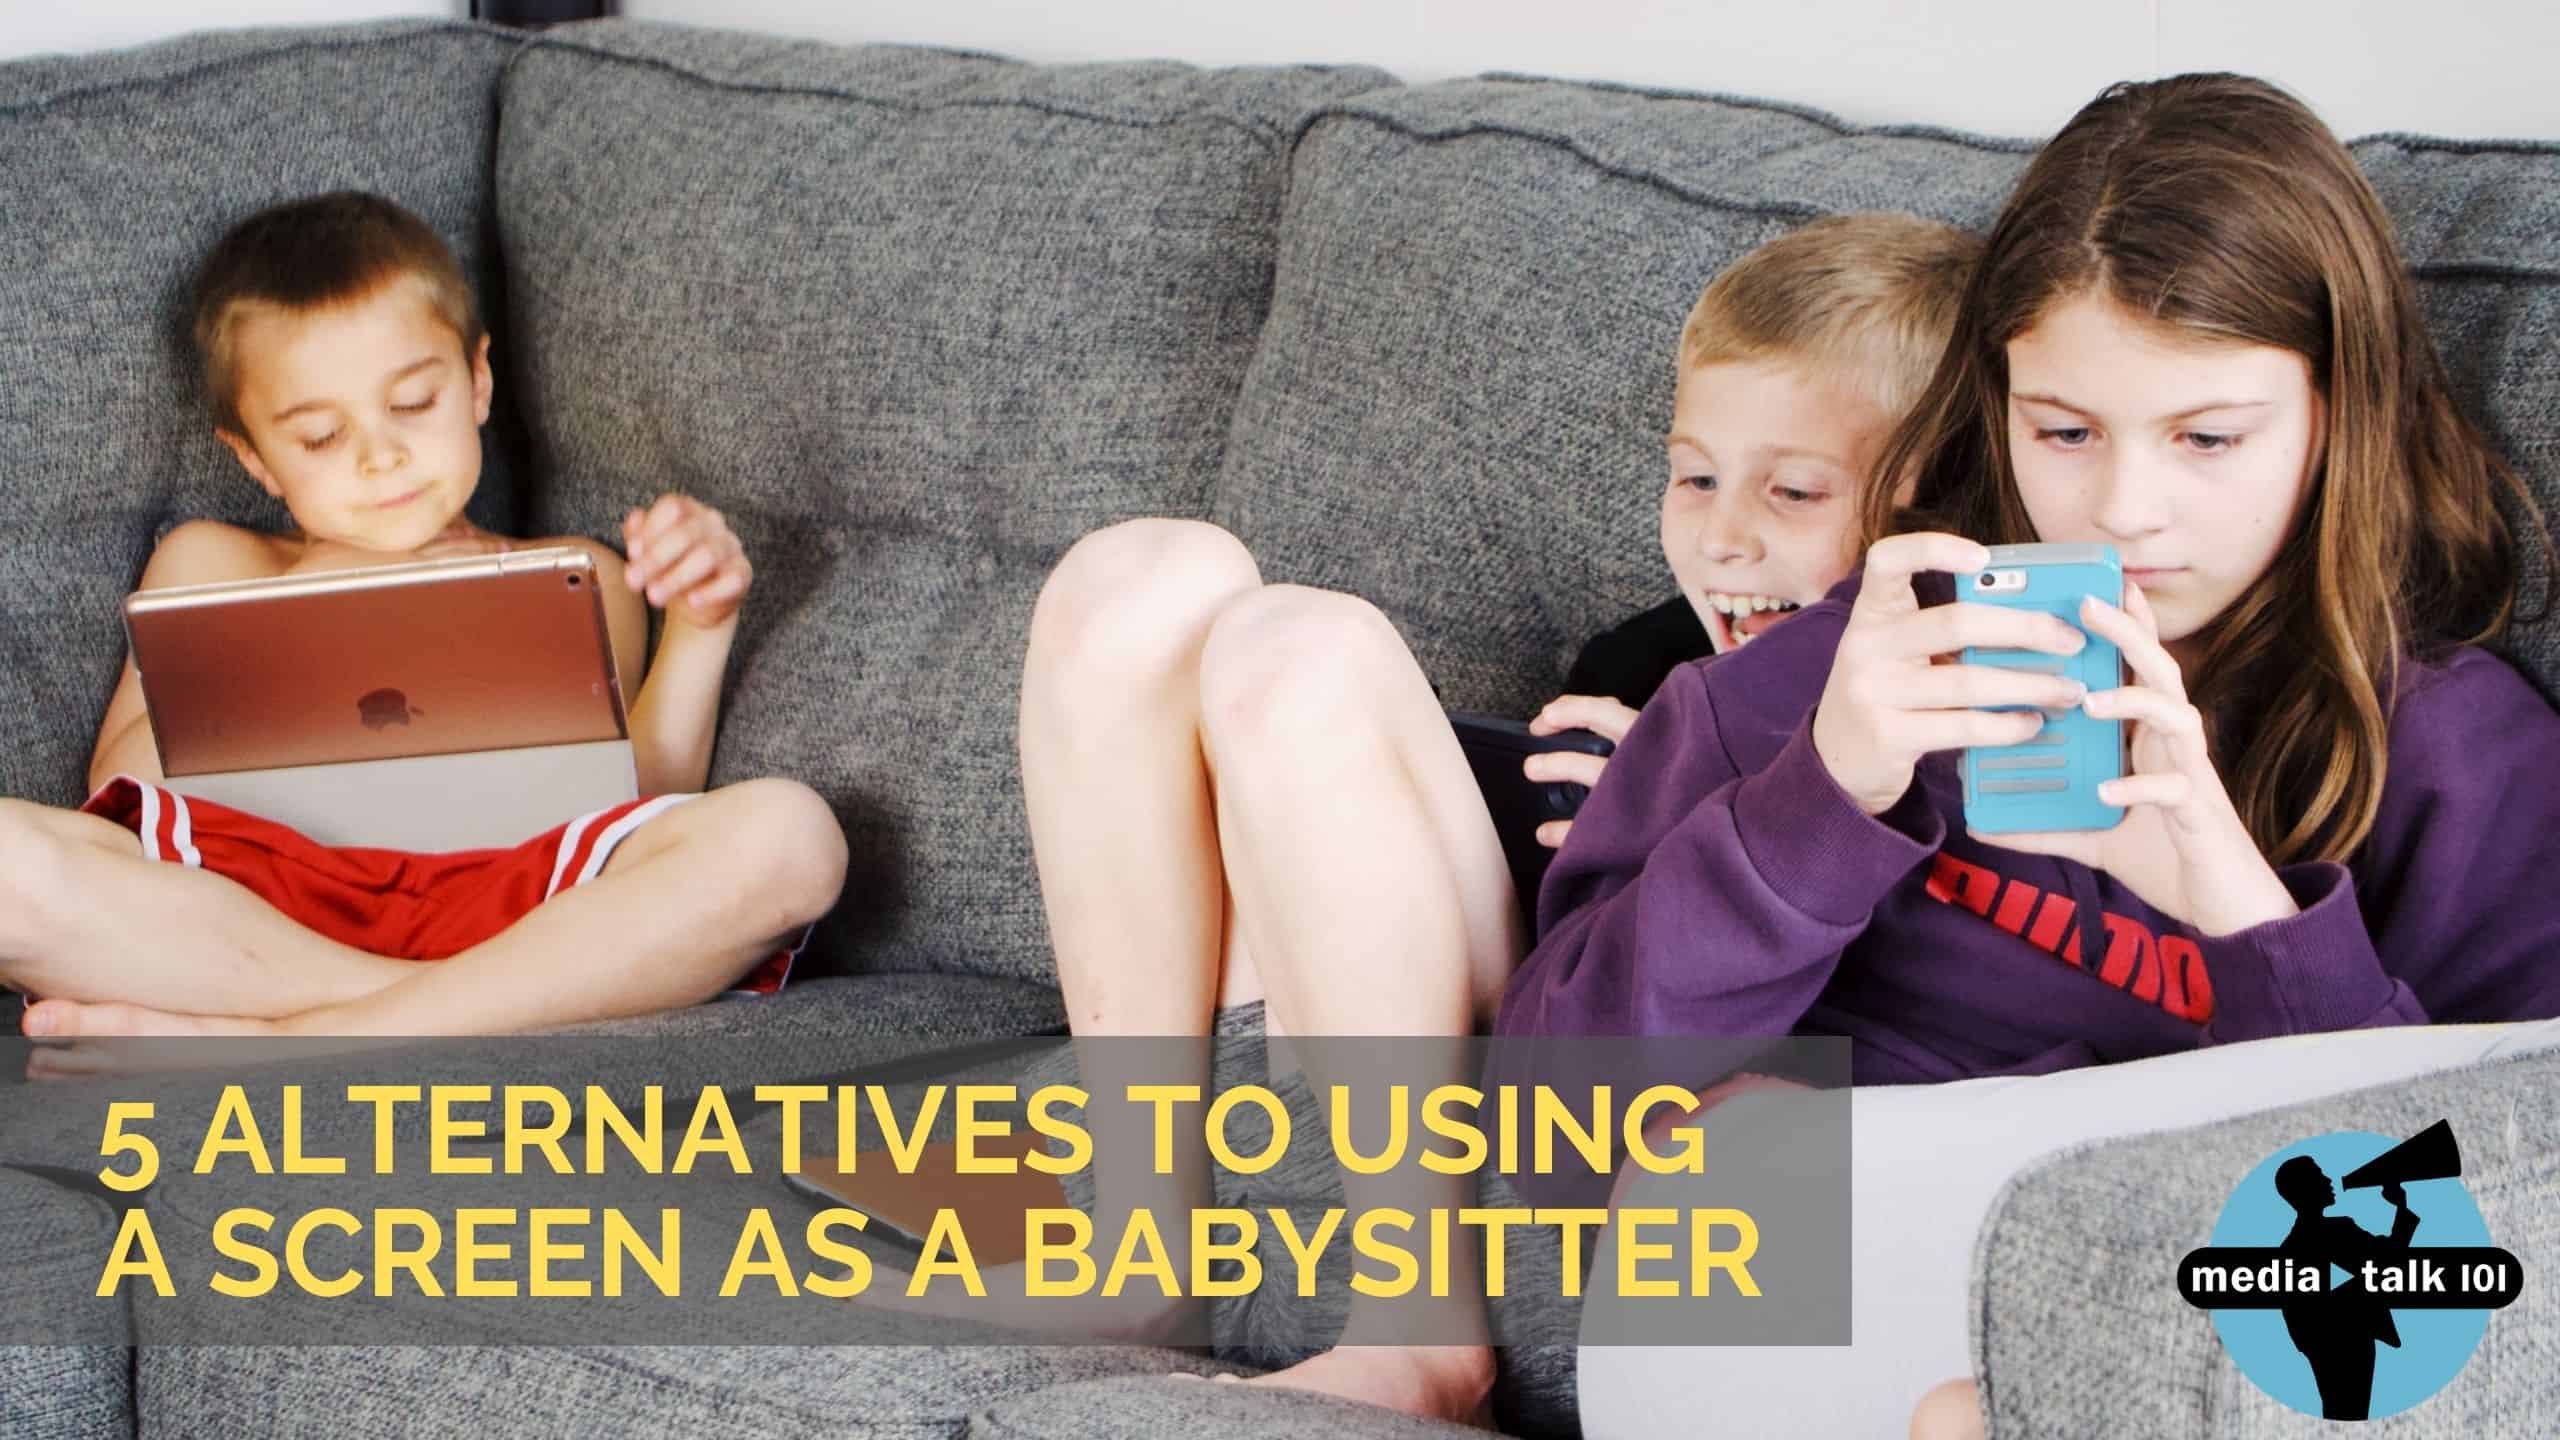 5 Alternatives to Using a Screen as a Babysitter